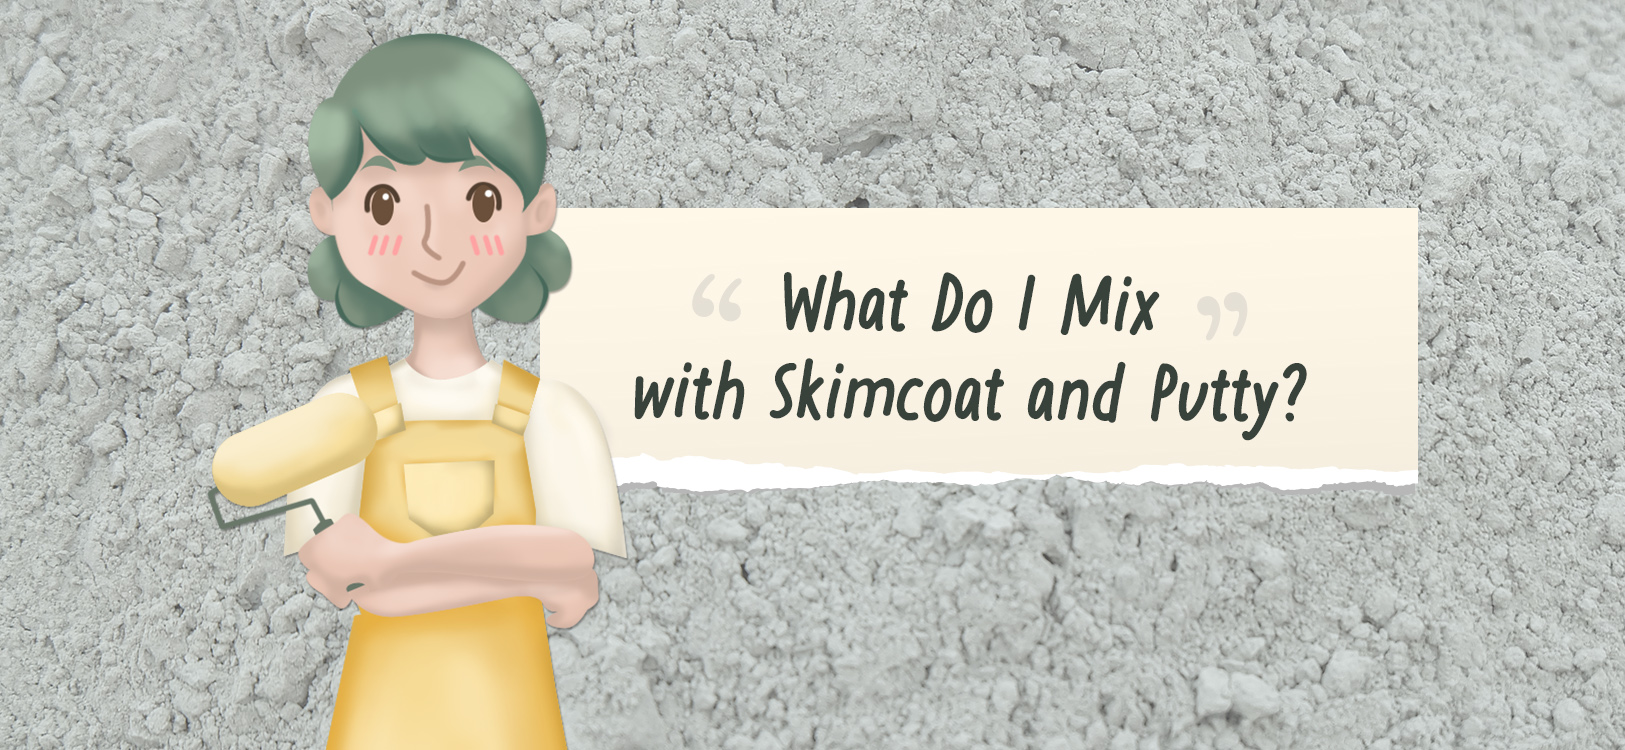 Paint TechTalk with Lettie: What Do I Mix with Skimcoat and Putty?